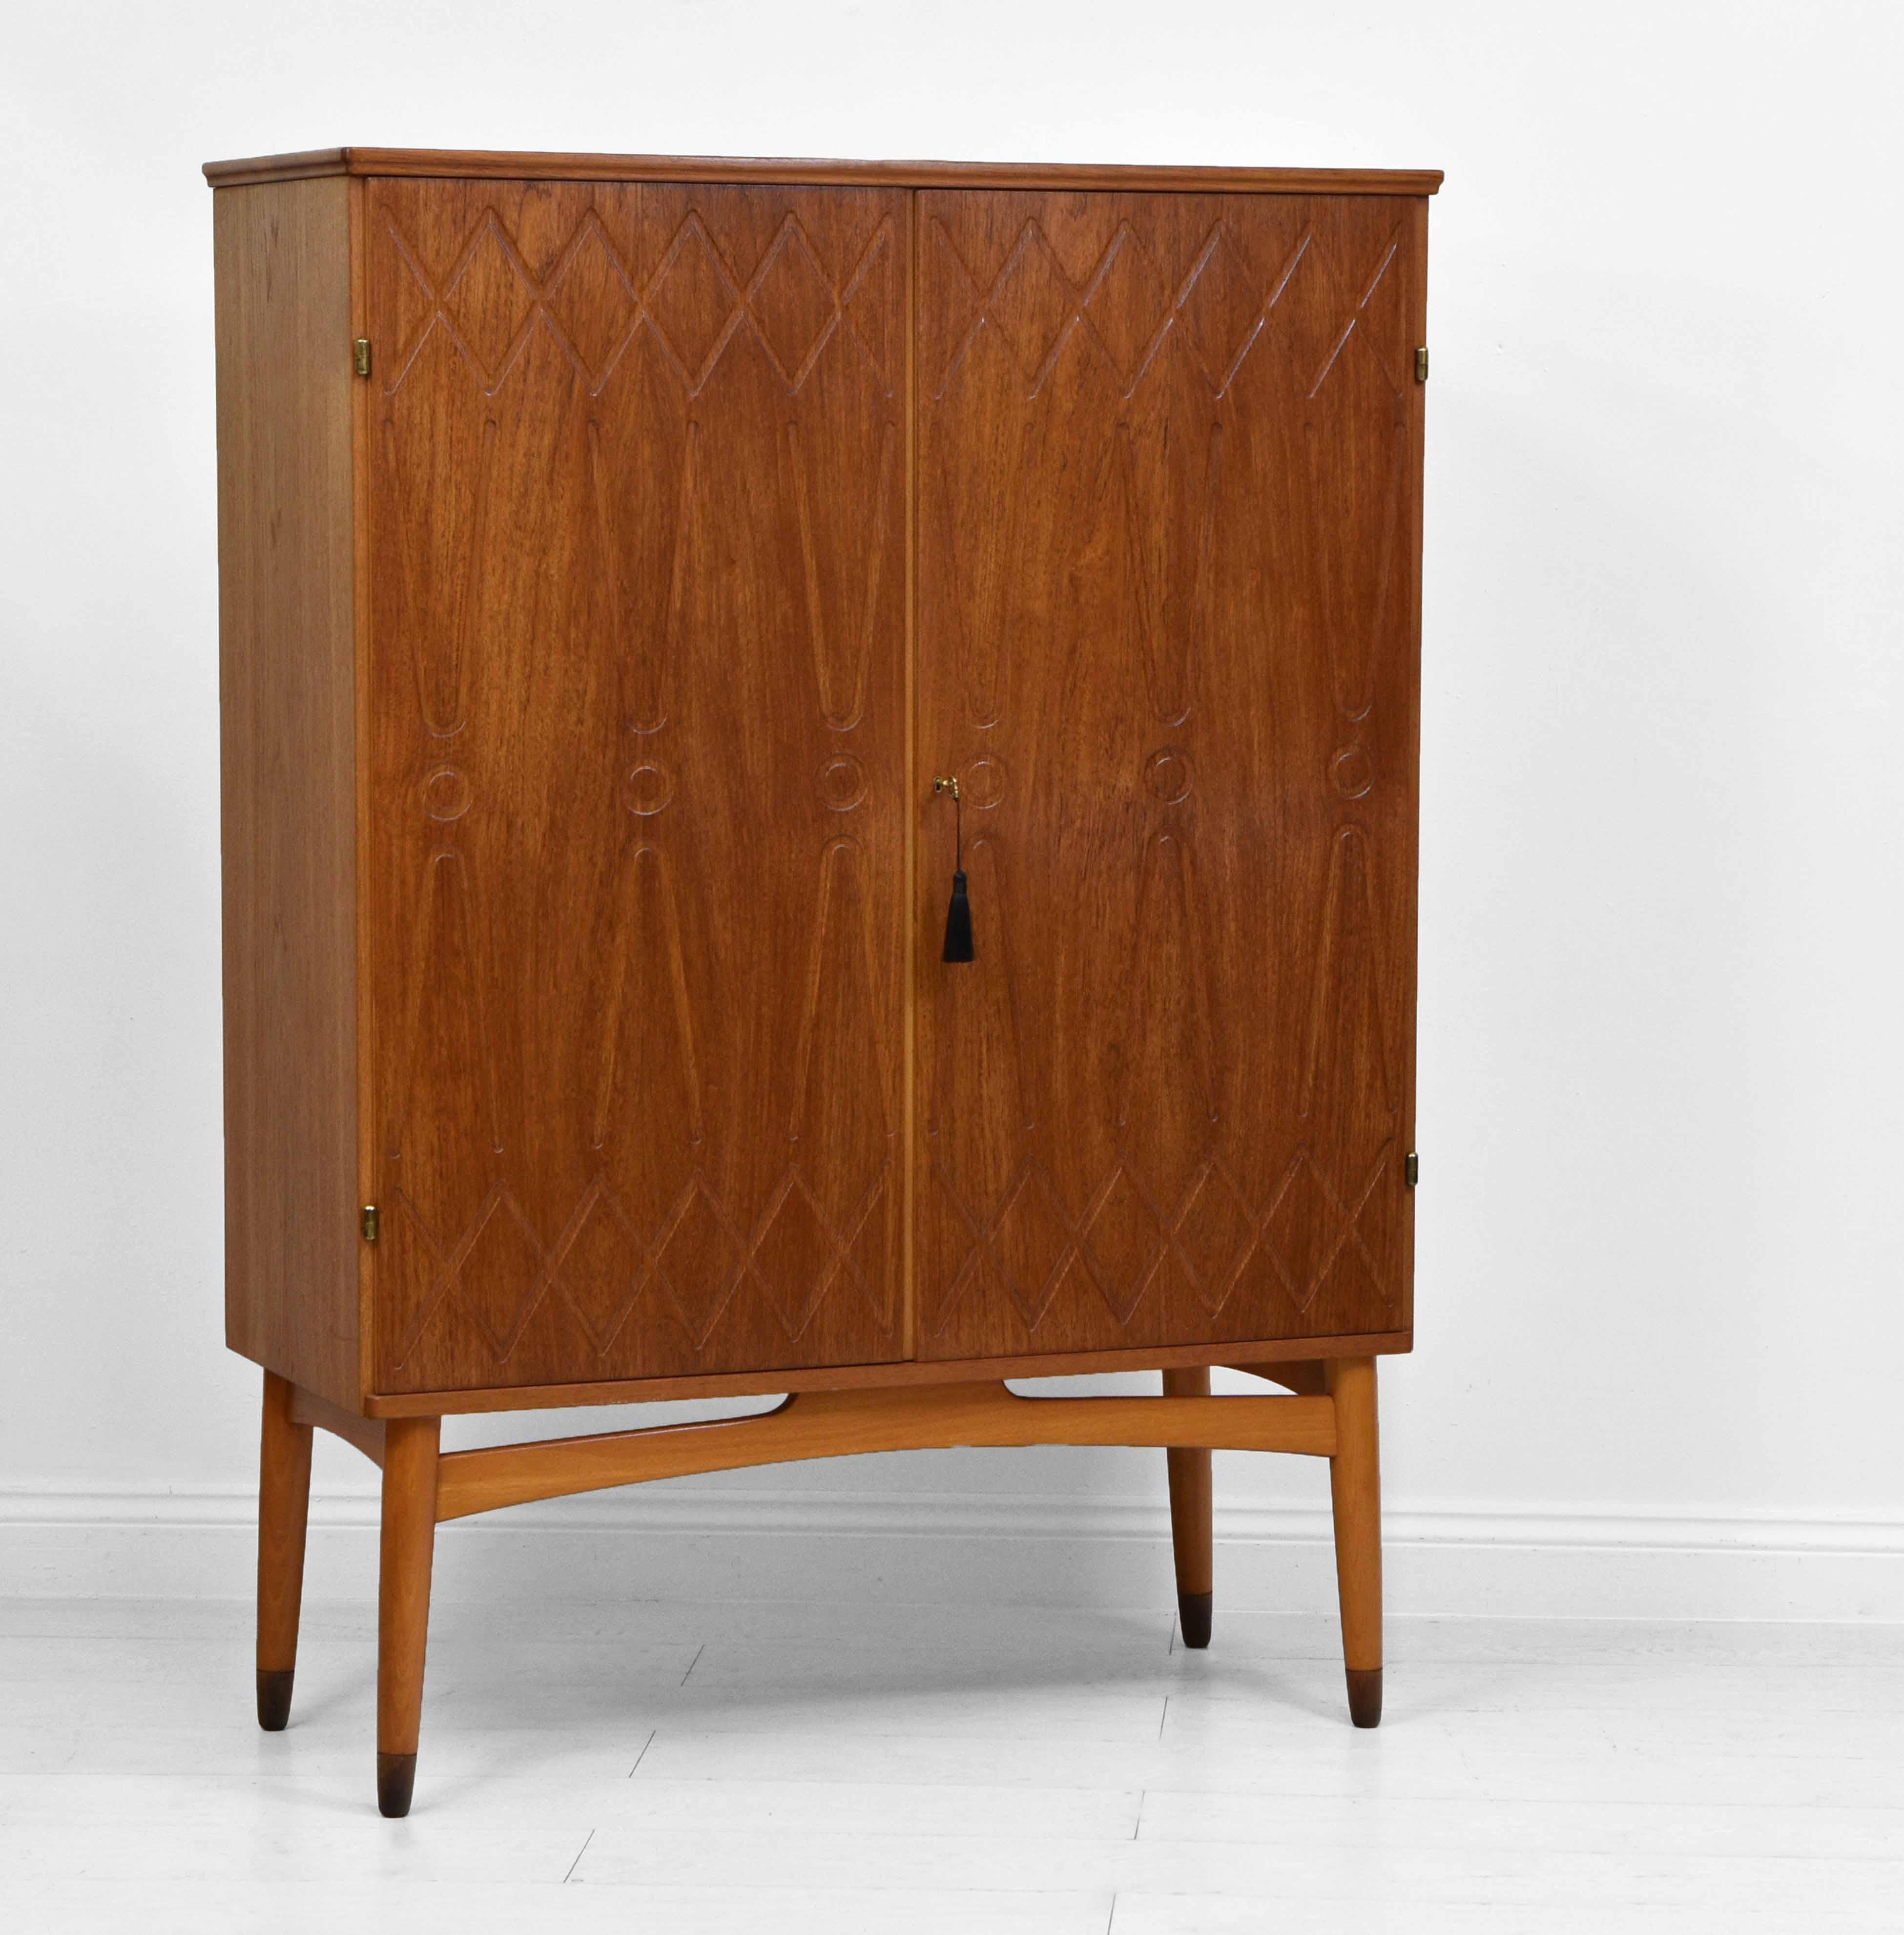 Mid century Scandinavian teak cabinet with geometric relief design on the doors. Attributed to Swedish designer Kirke Nielsen for Abrahamssons Möbelfabrik. Circa 1950s.

Overall in very good condition, showing some light marks in places.

The